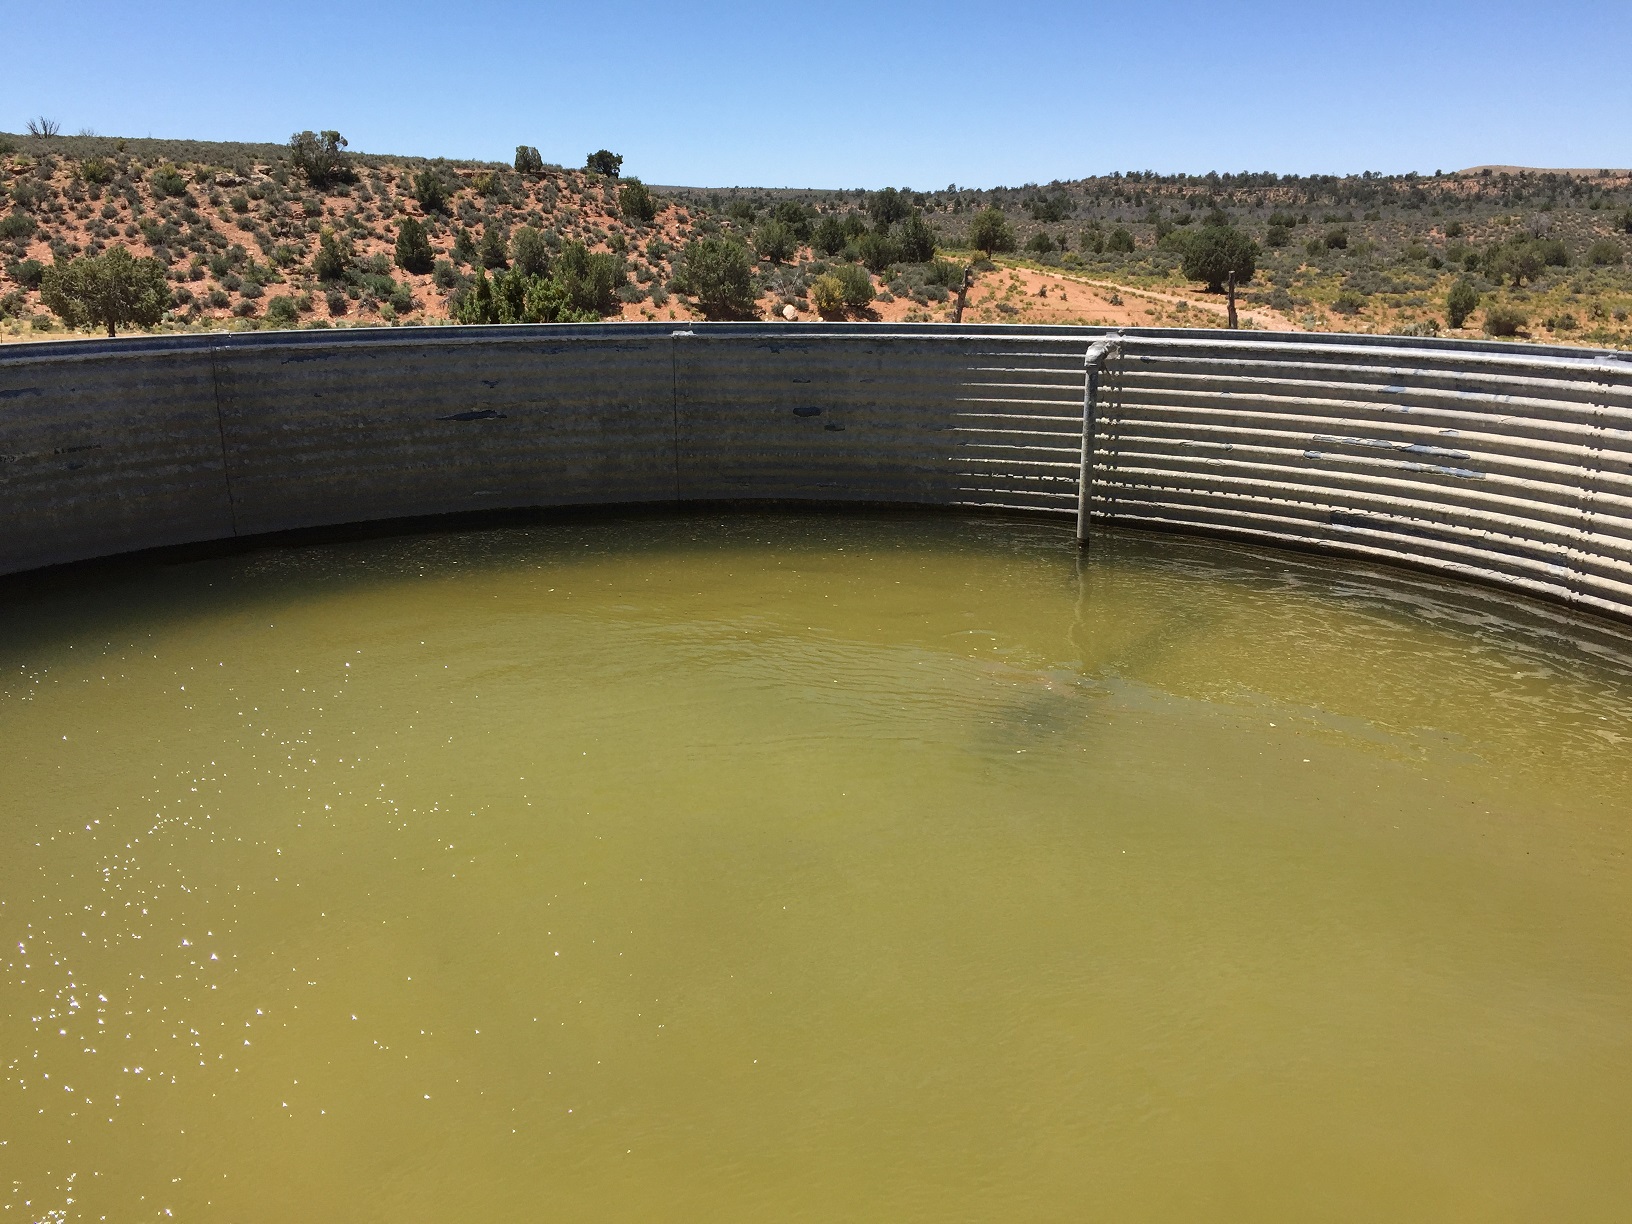 Inside of a water tank on the Wildcat Ranch